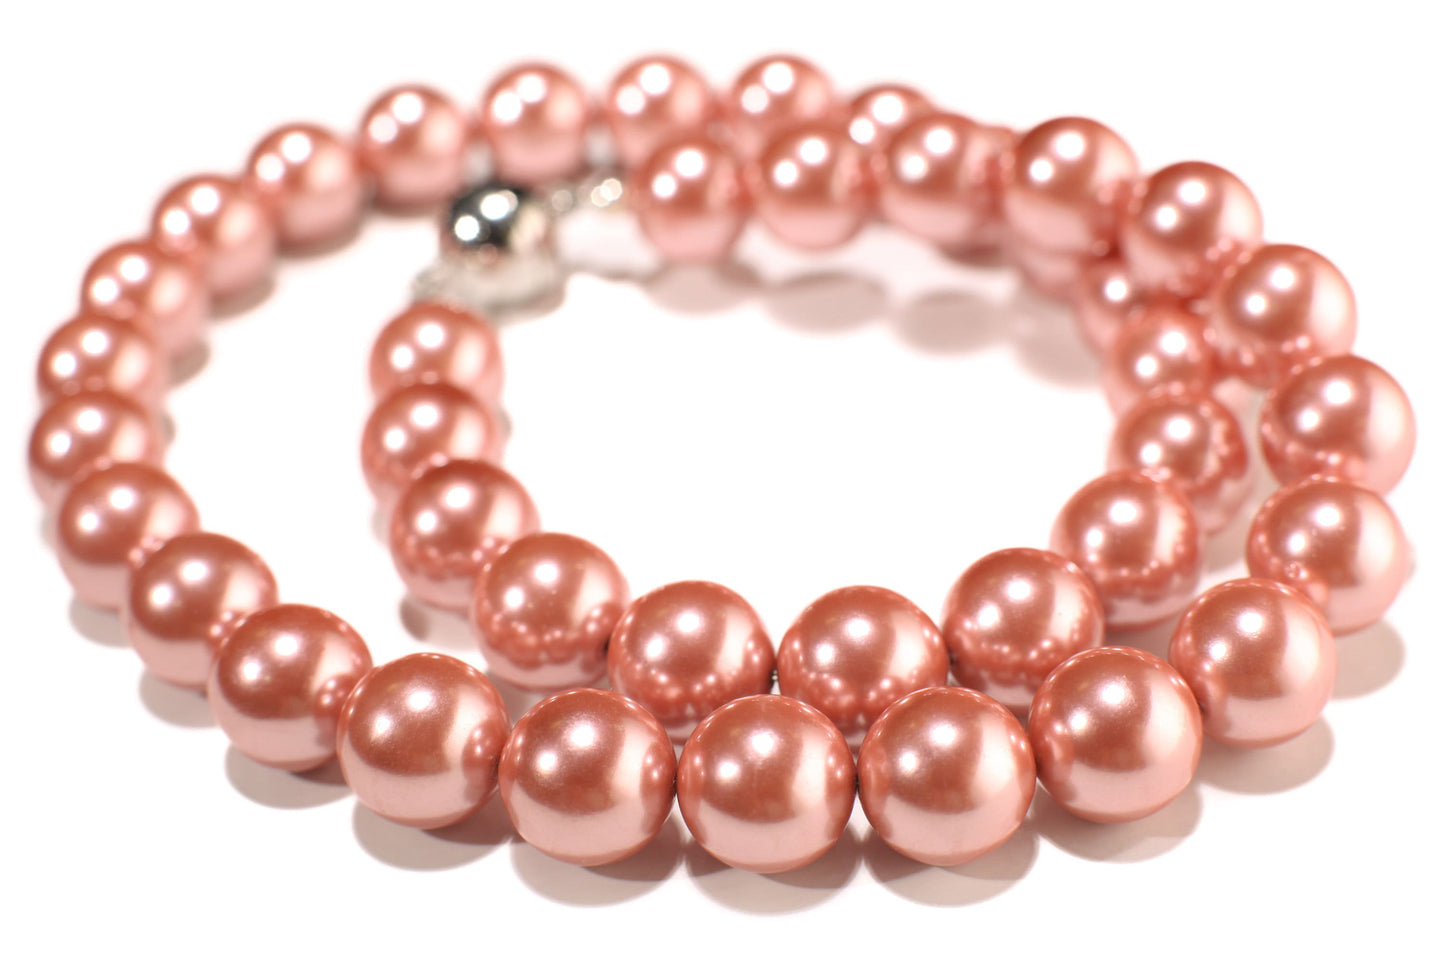 Copper Pink South Sea Shell Pearl 12mm Large High Luster Statement Necklace with Strong Magnetic Ball Clasp Necklace, Bridal, Gift for Her